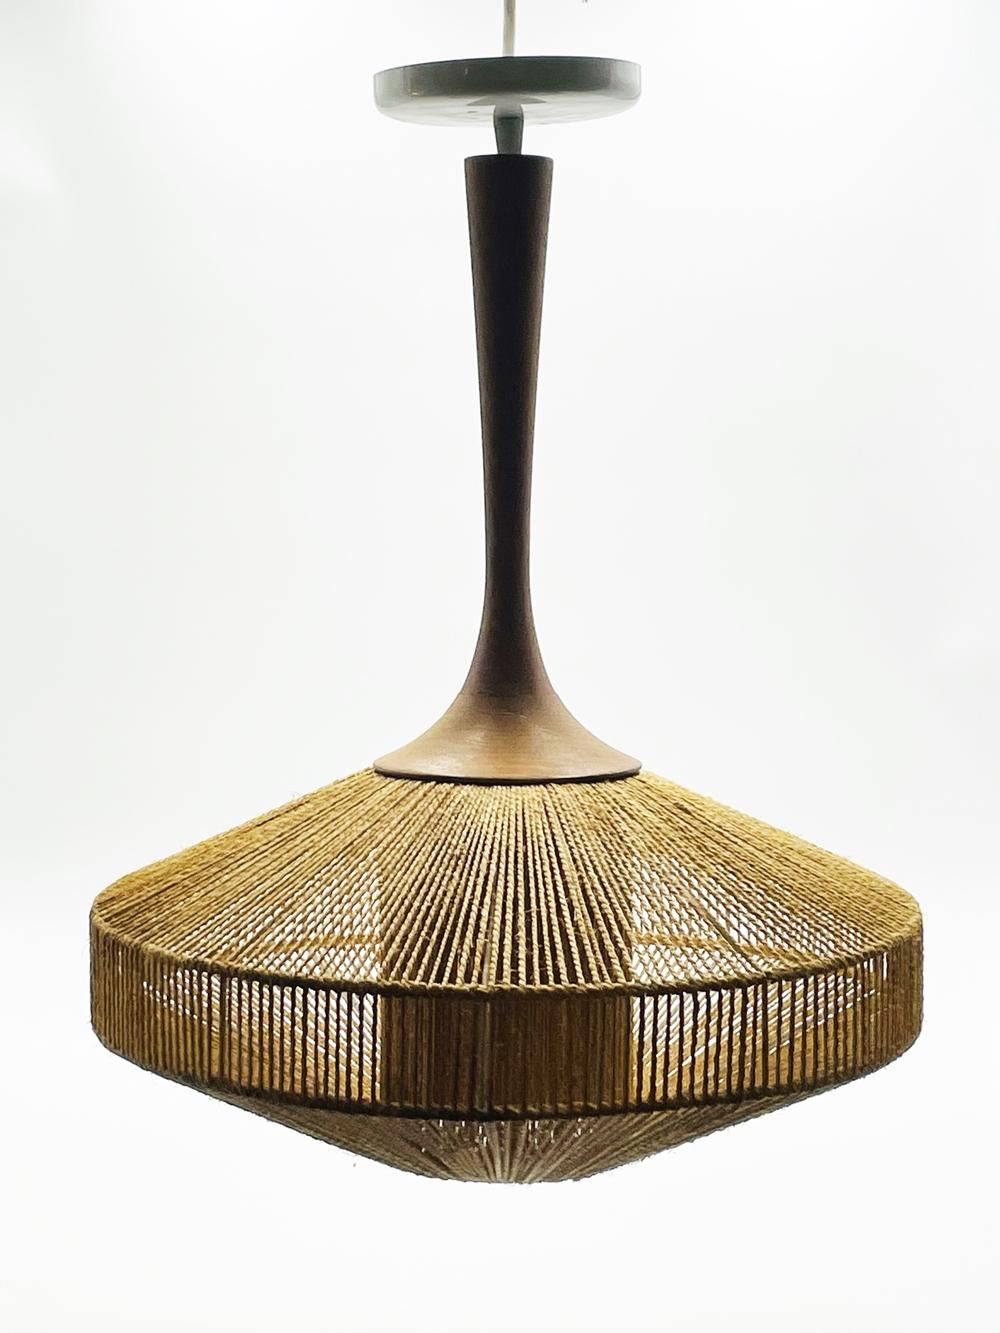 Danish Fog & Morup Hanging Light with Teak Stem and Jute-Wrapped Shade